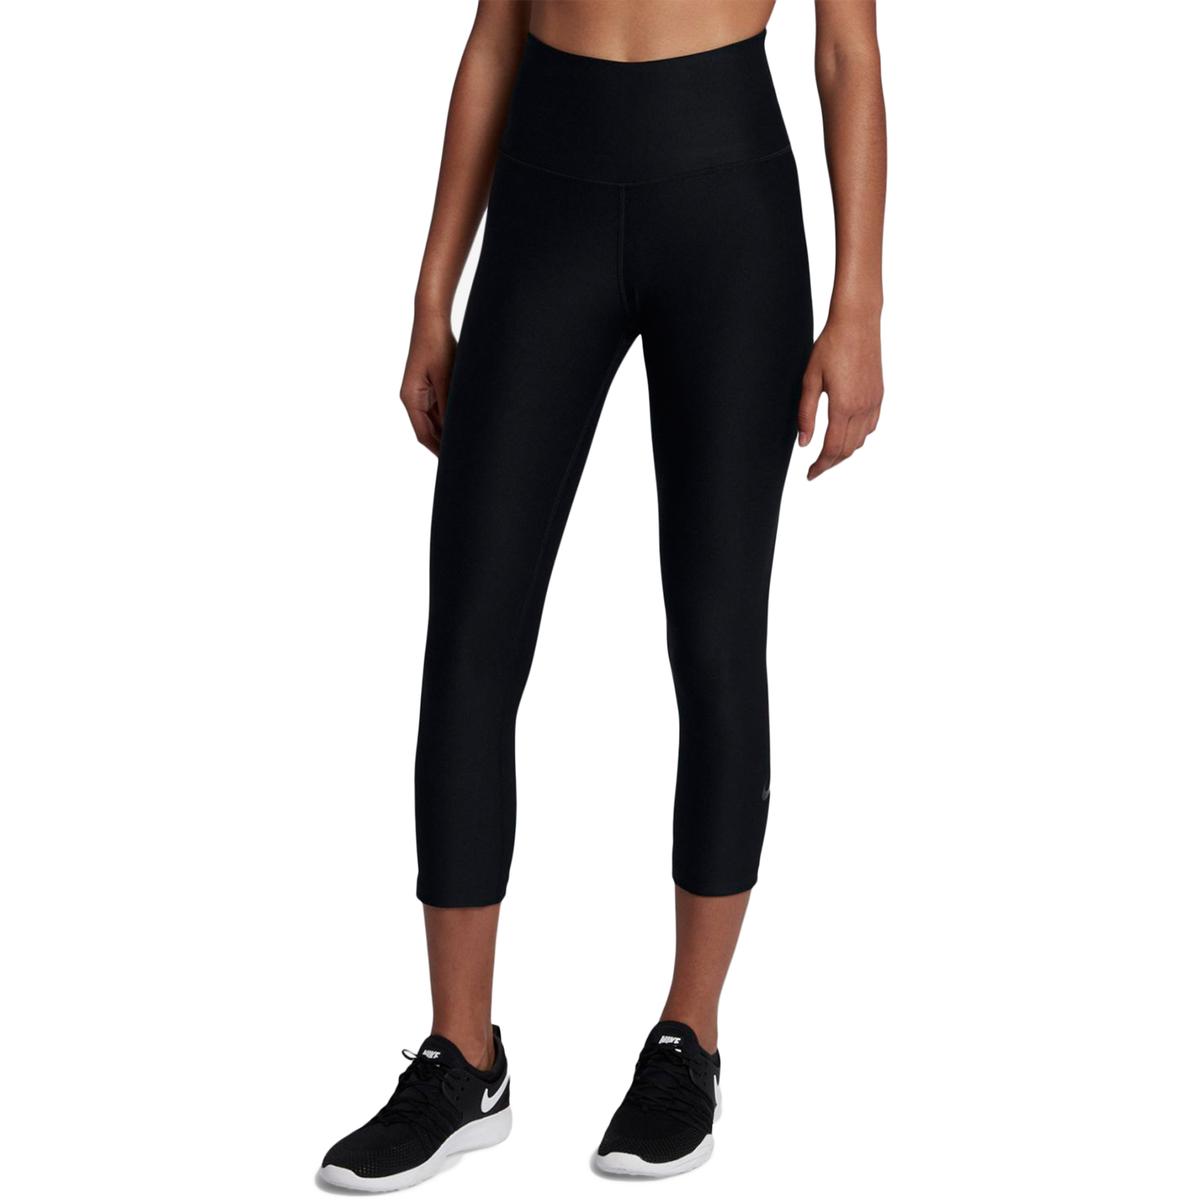 63 Simple Womens capri workout pants for Six Pack